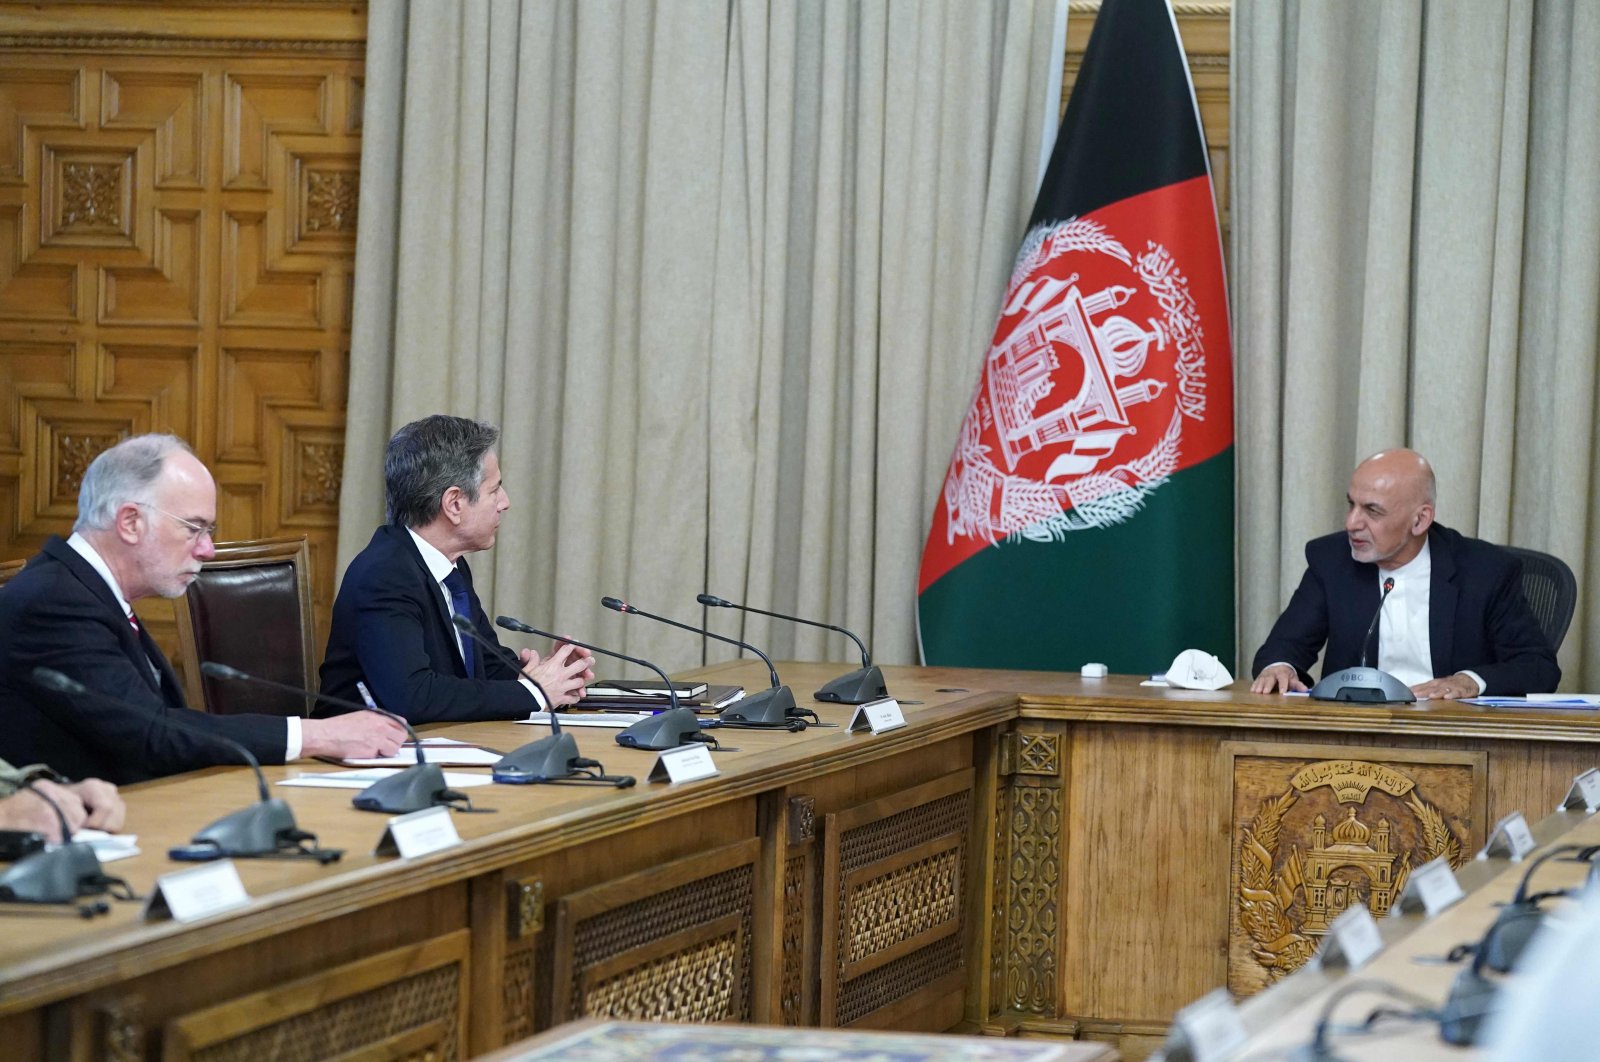 This handout photograph shows U.S. Secretary of State Antony Blinken (2nd L) with Afghan President Ashraf Ghani (R), in Kabul, Afghanistan, April 15, 2021. (Afghan Presidential Palace via AFP)